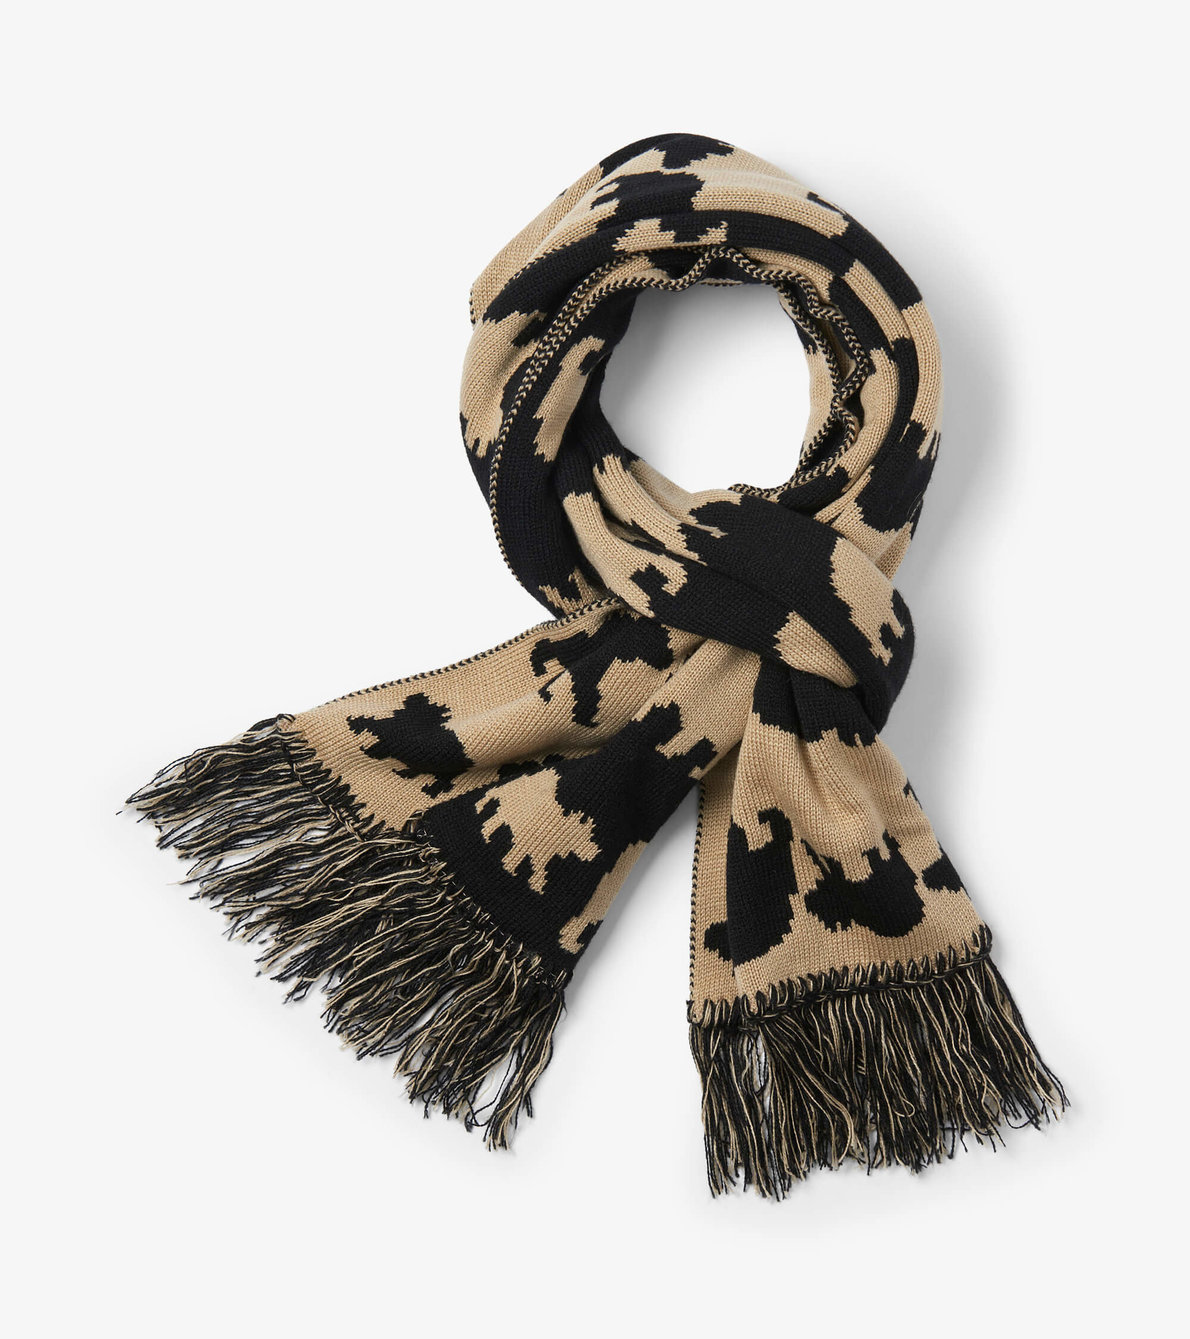 View larger image of Black Bears Adult Heritage Scarf